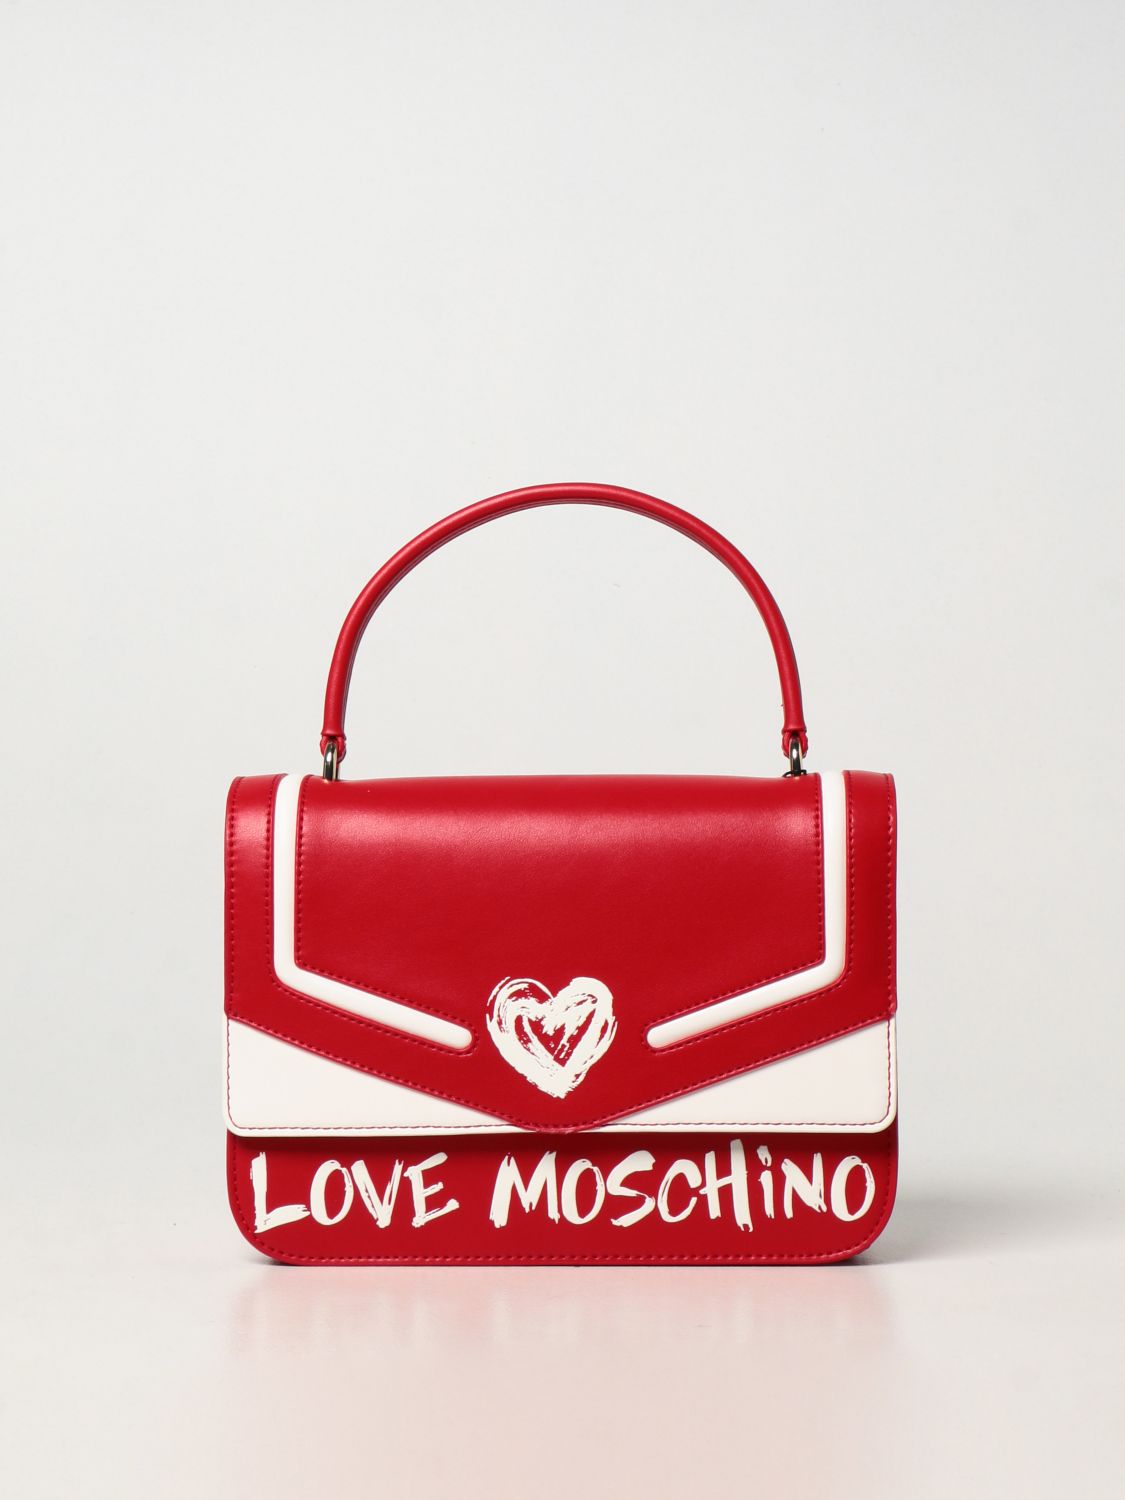 LOVE MOSCHINO: synthetic leather - Red | Love Moschino handbag JC4255PP0DKE1 online on